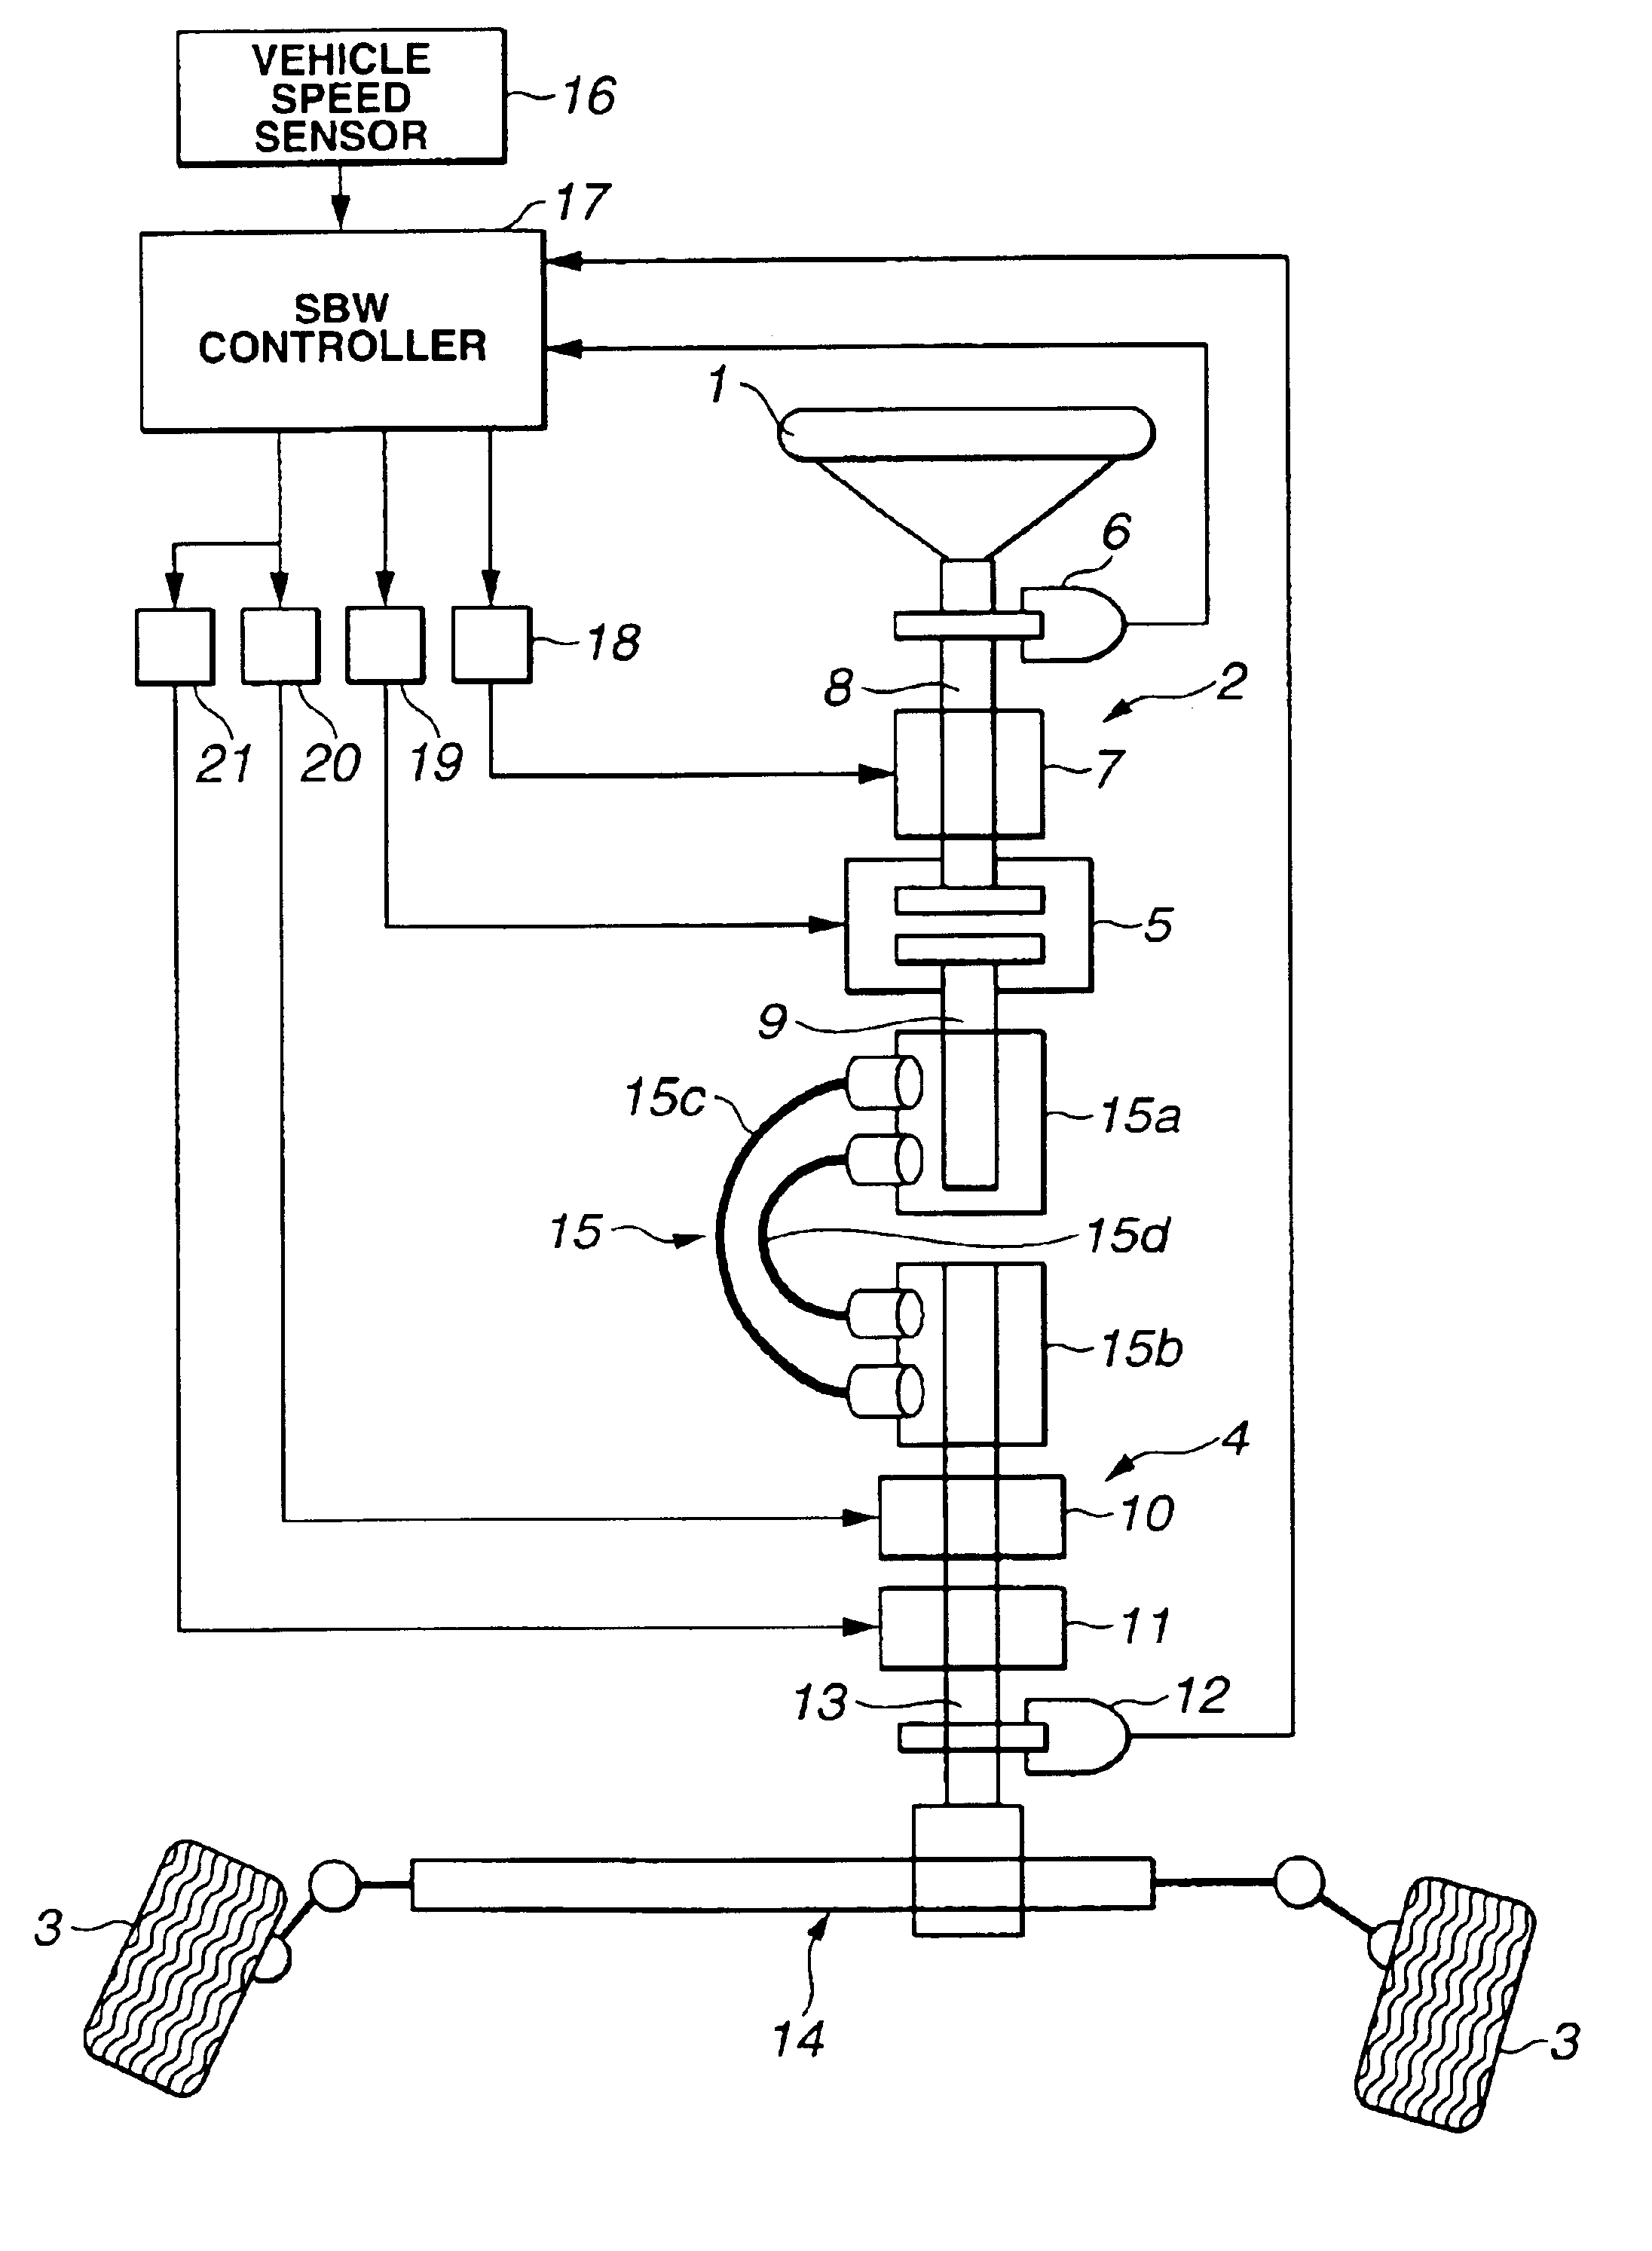 Steering apparatus and method for automotive vehicle